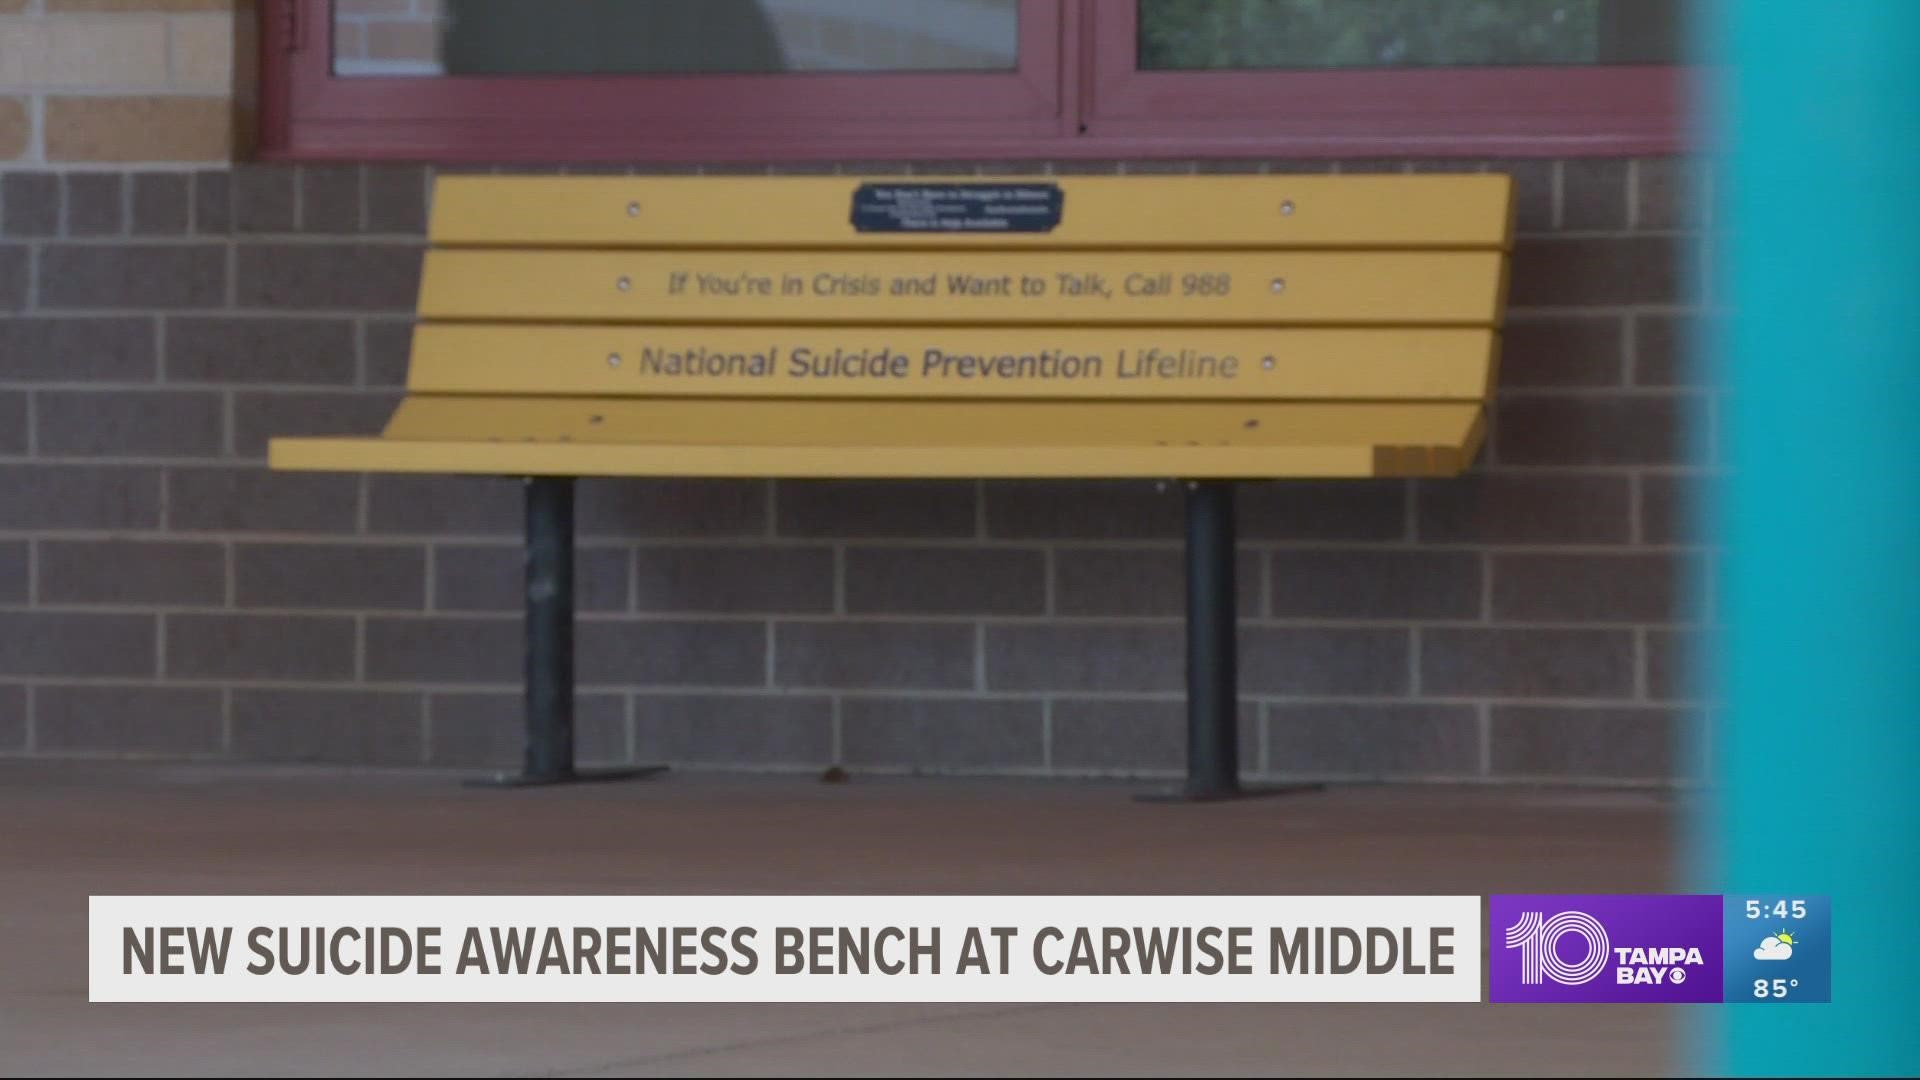 Suicide awareness benches spread a life-saving message to encourage students to get help if needed.